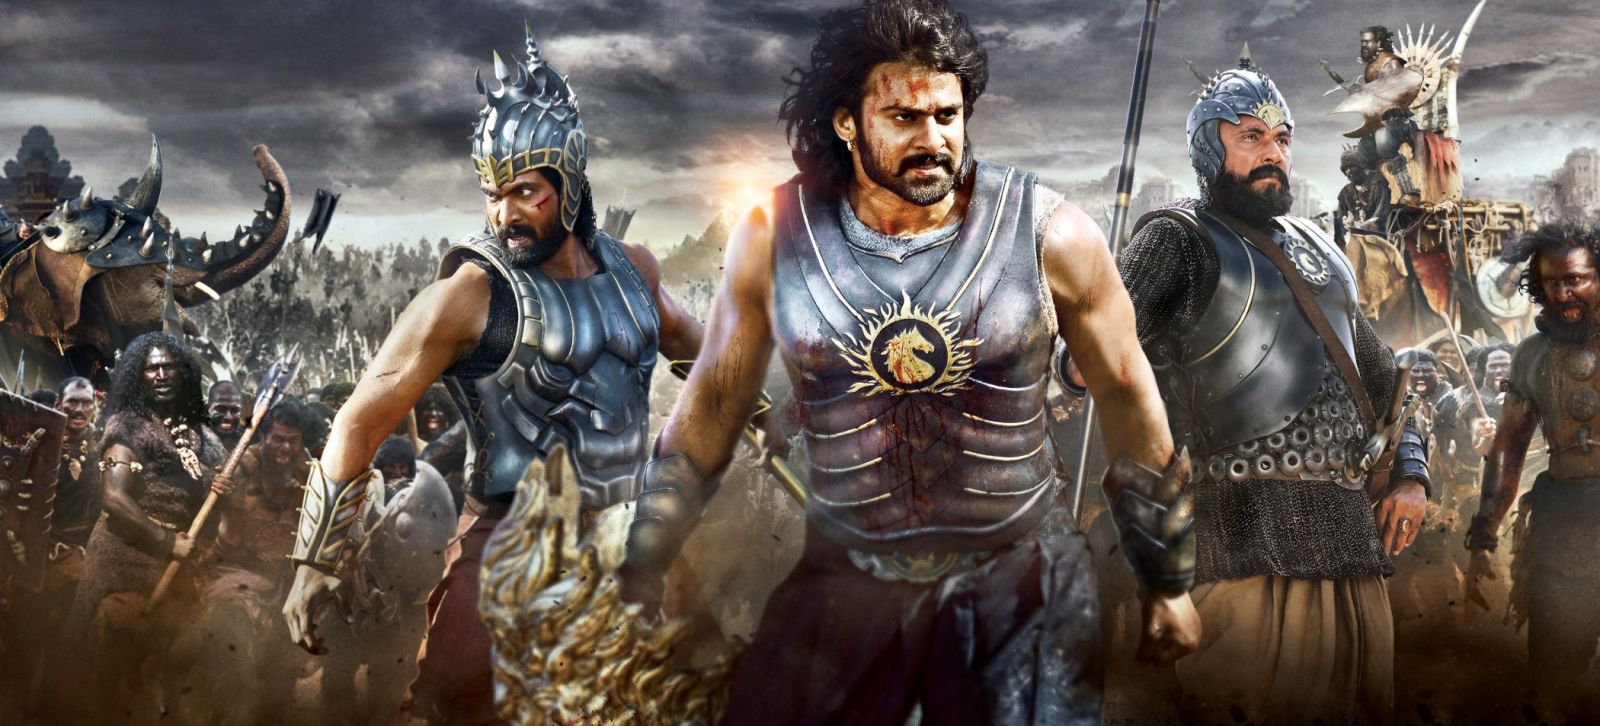 Baahubali Movie Till Today Box Office Collection Report